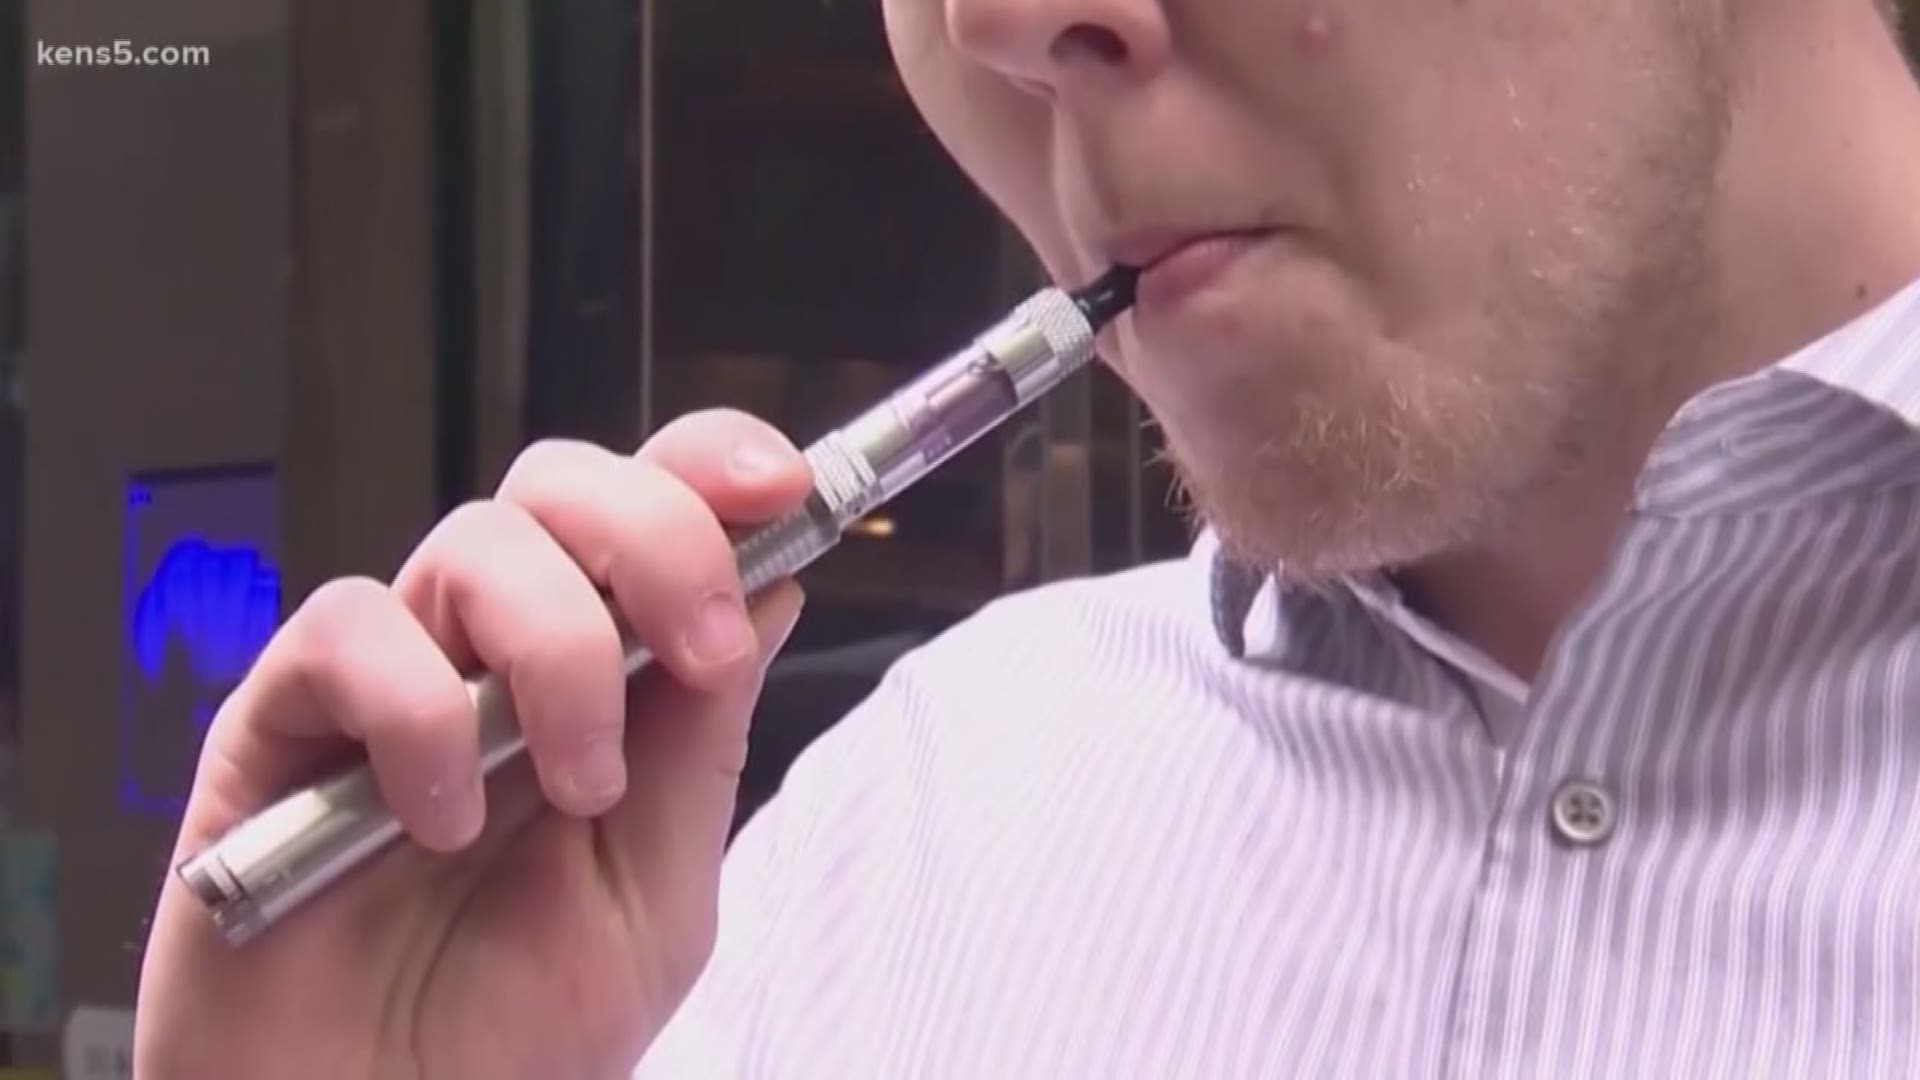 A proposal is being floated to ban tobacco and tobacco products from San Antonio parks.